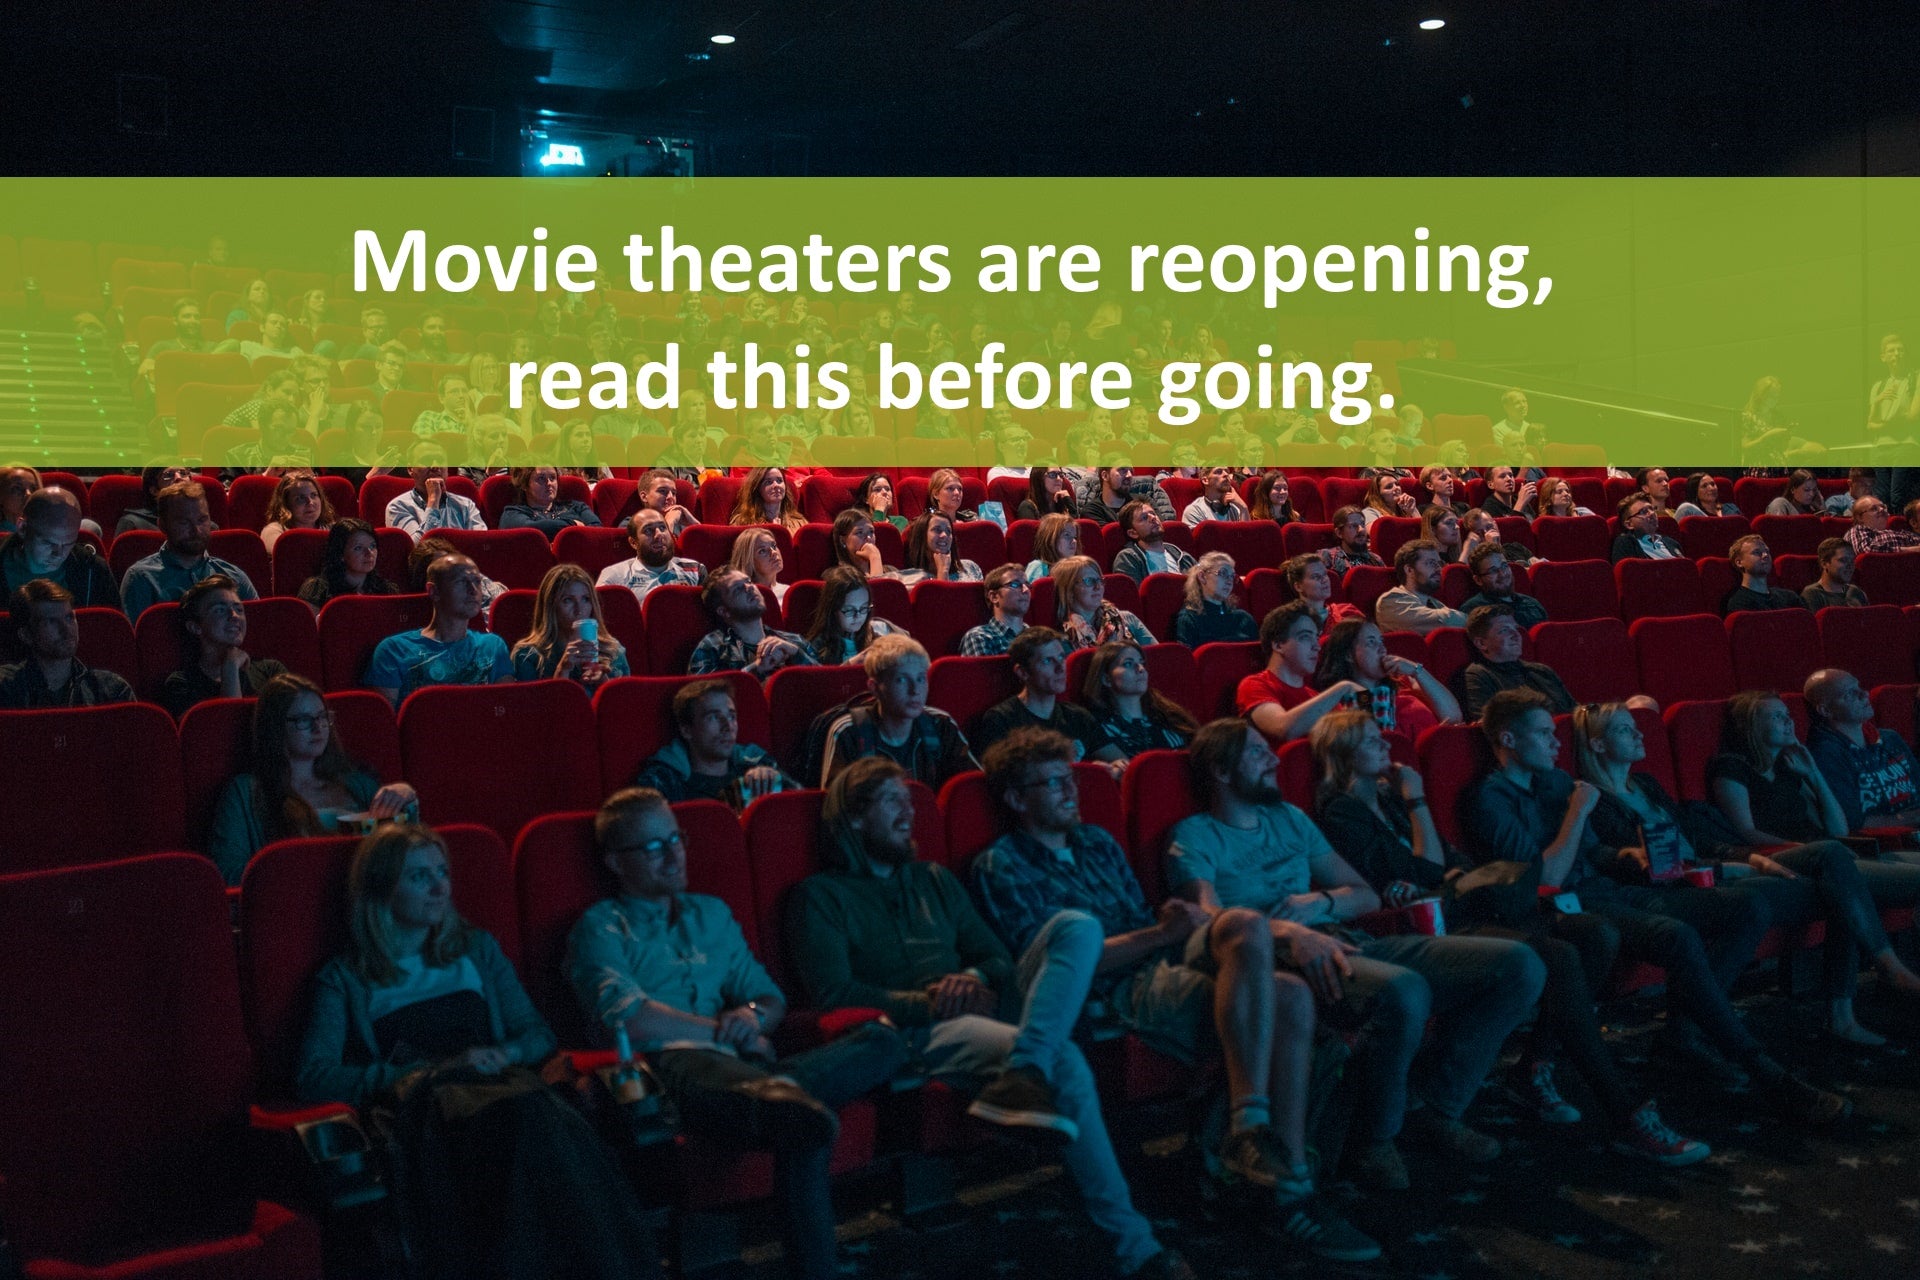 Read This Before Going to Movie Theaters